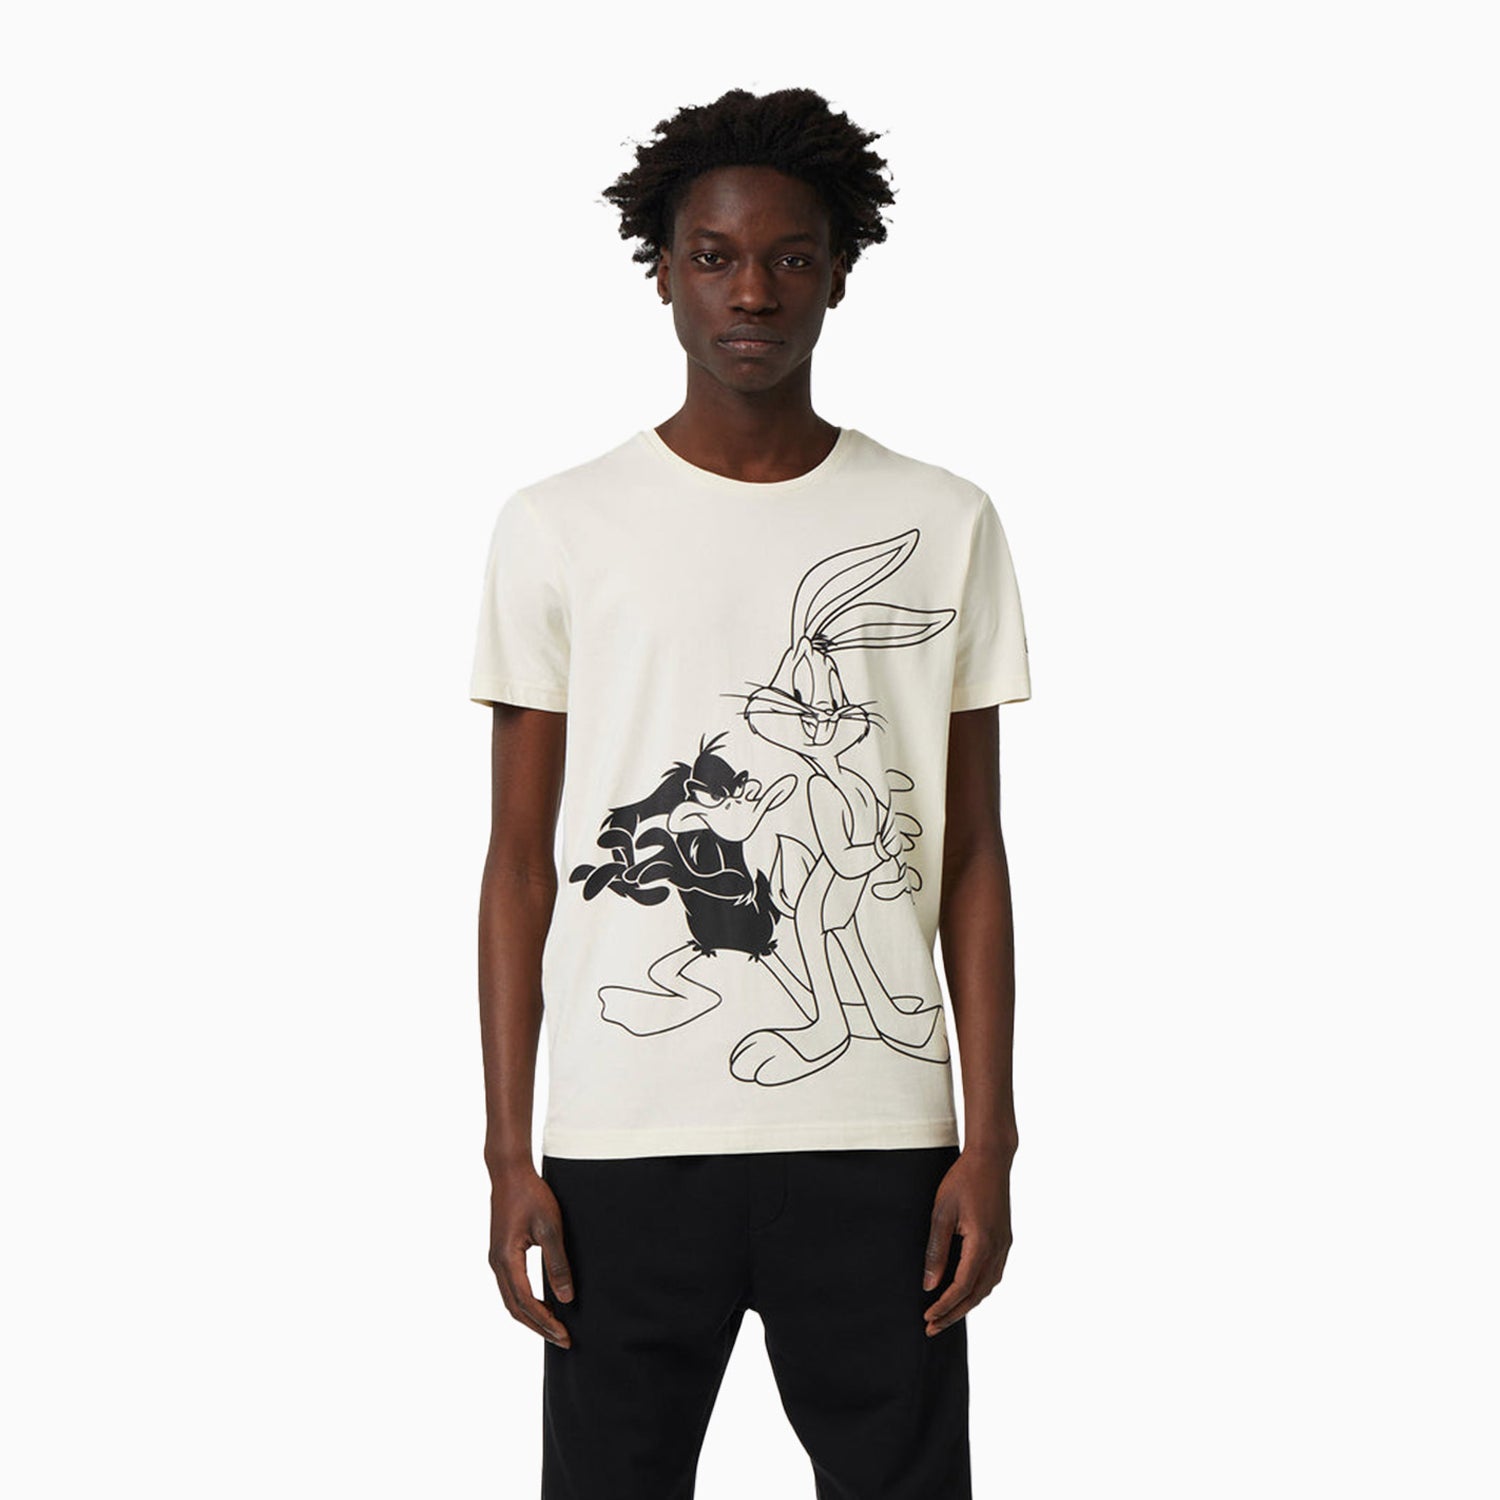 iceberg-mens-bugs-bunny-and-daffy-duck-short-sleeve-t-shirt-f012-639a-1094